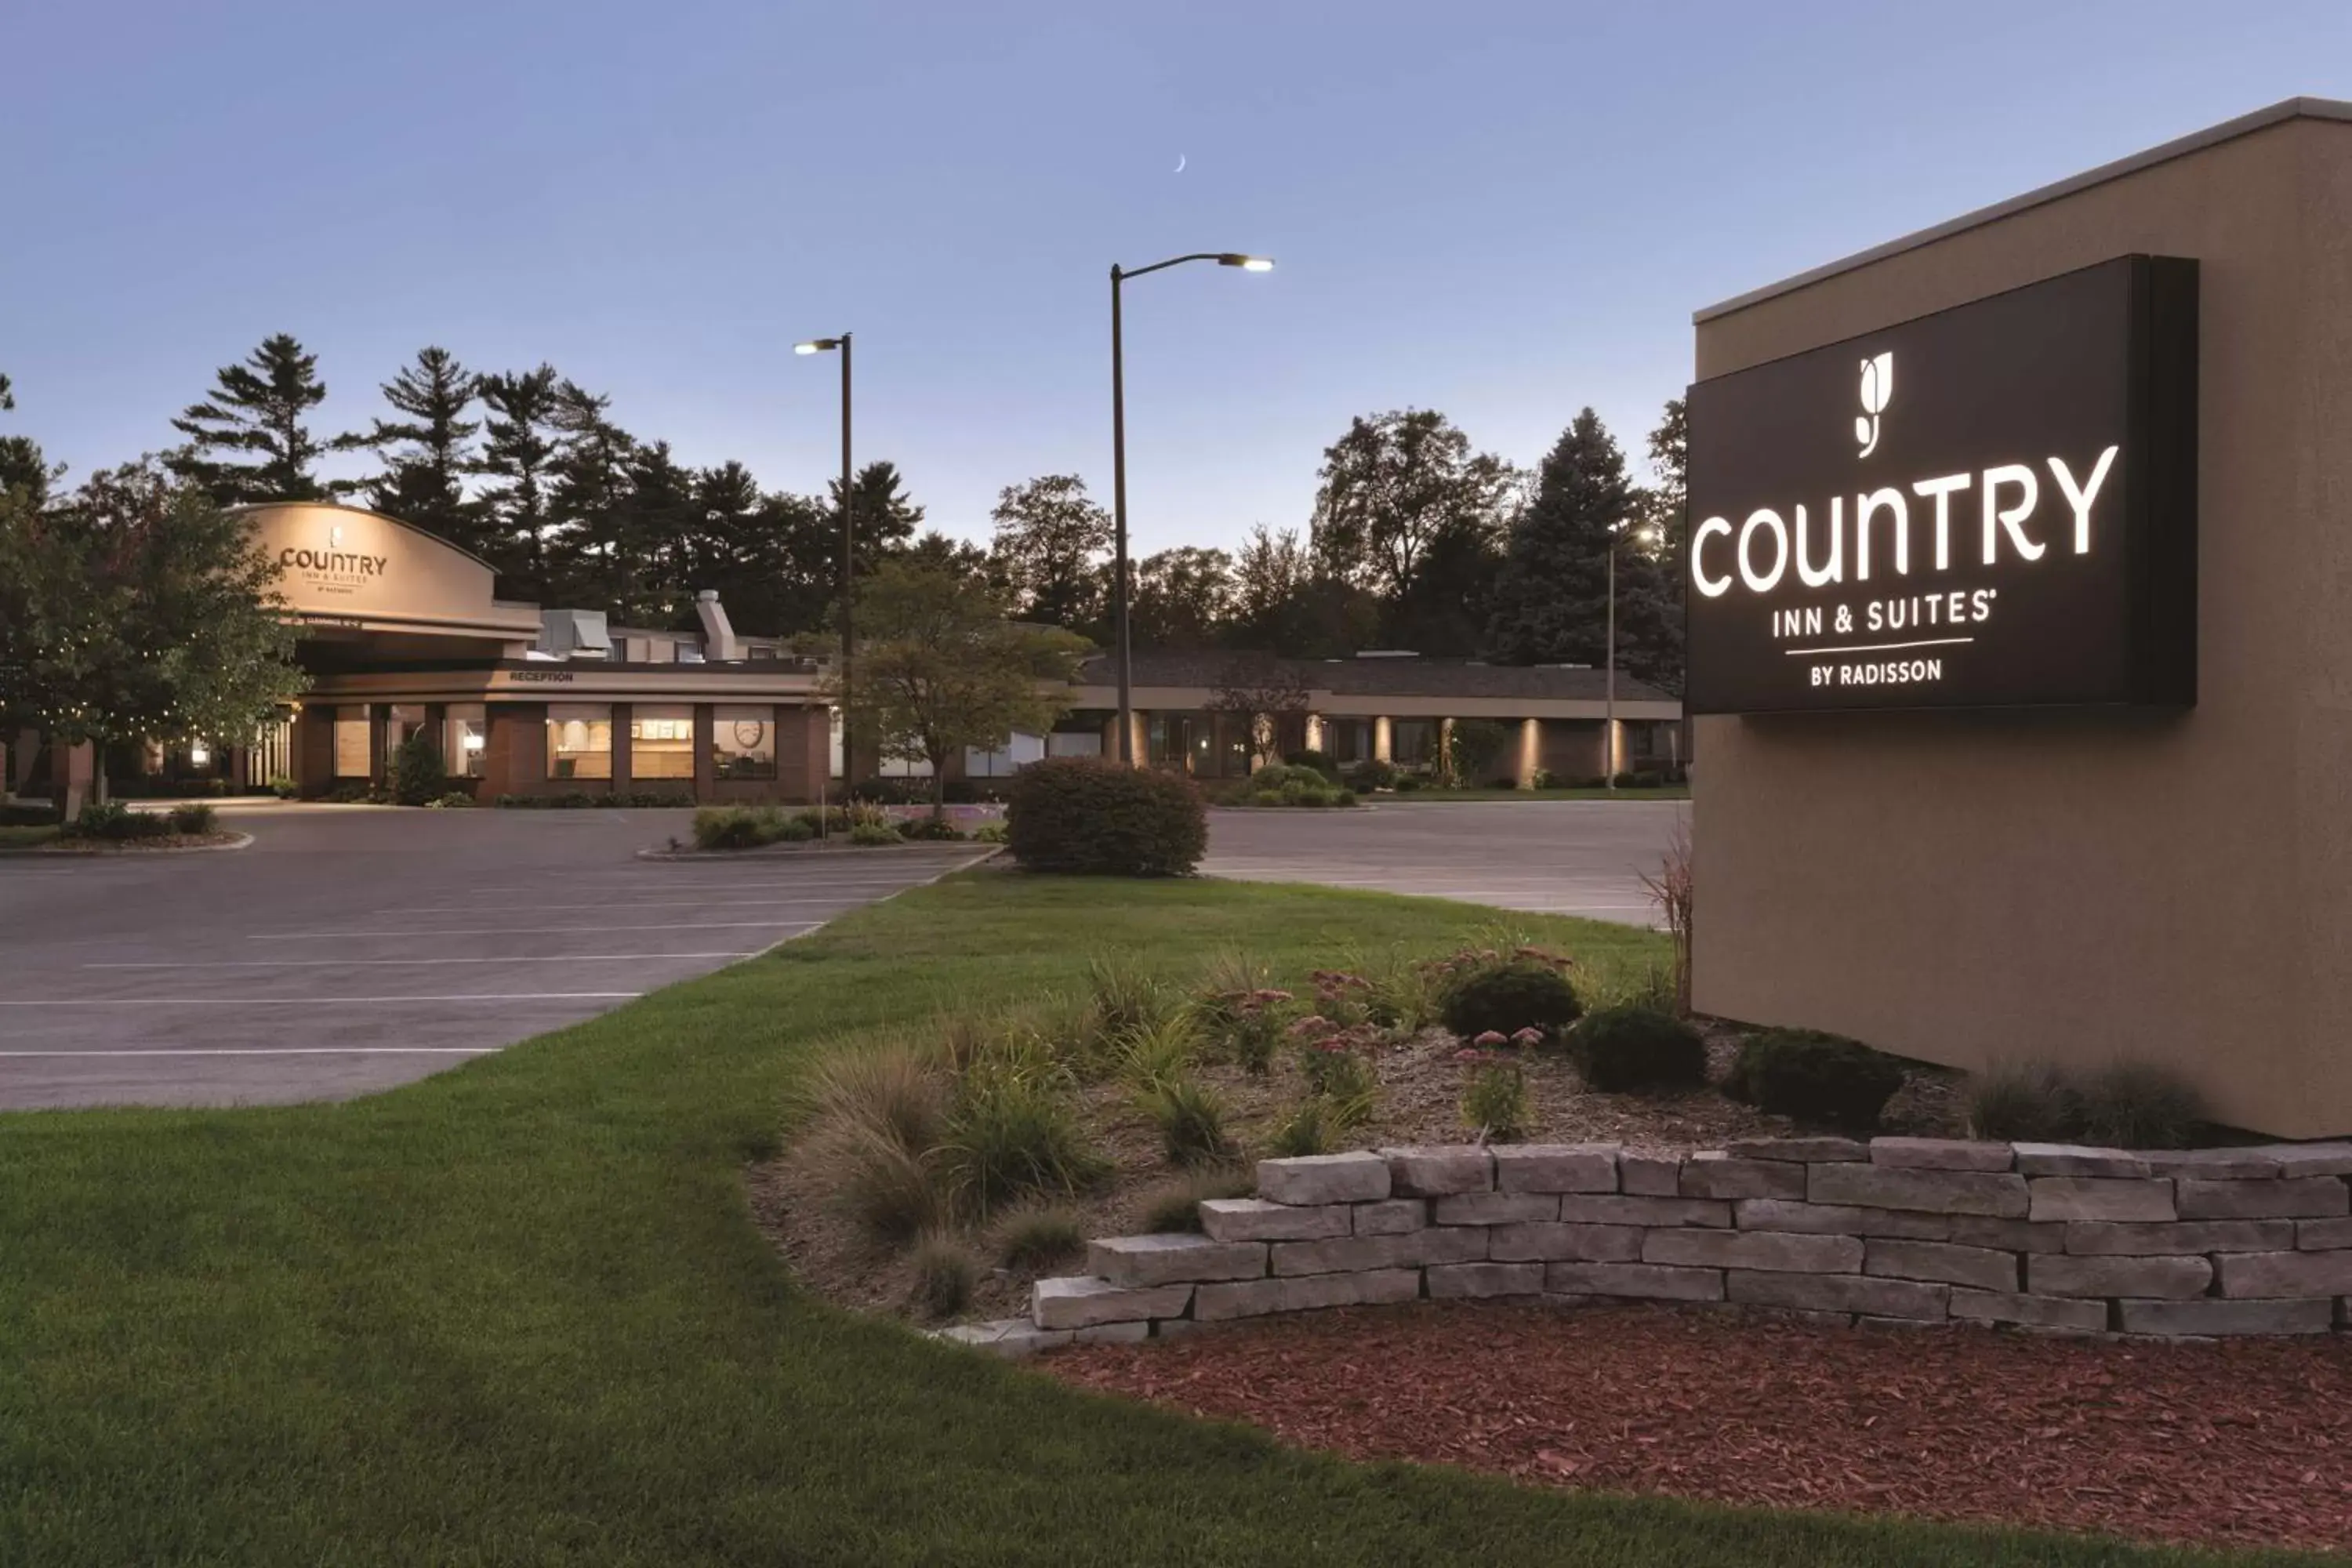 Property Building in Country Inn & Suites by Radisson, Traverse City, MI